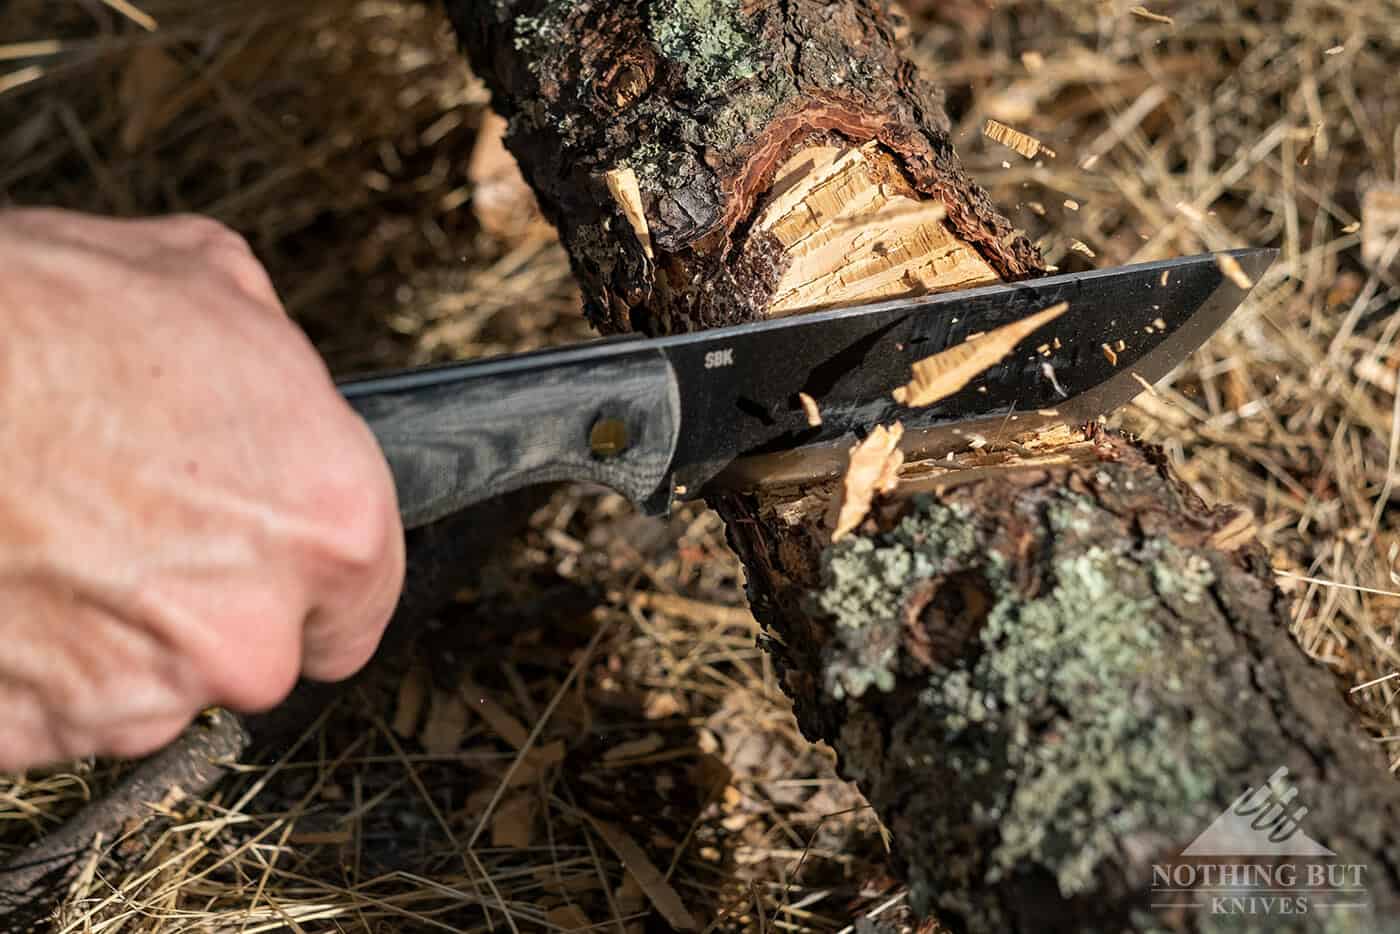 Chopping large branches or small logs is no problem with the SBK. 